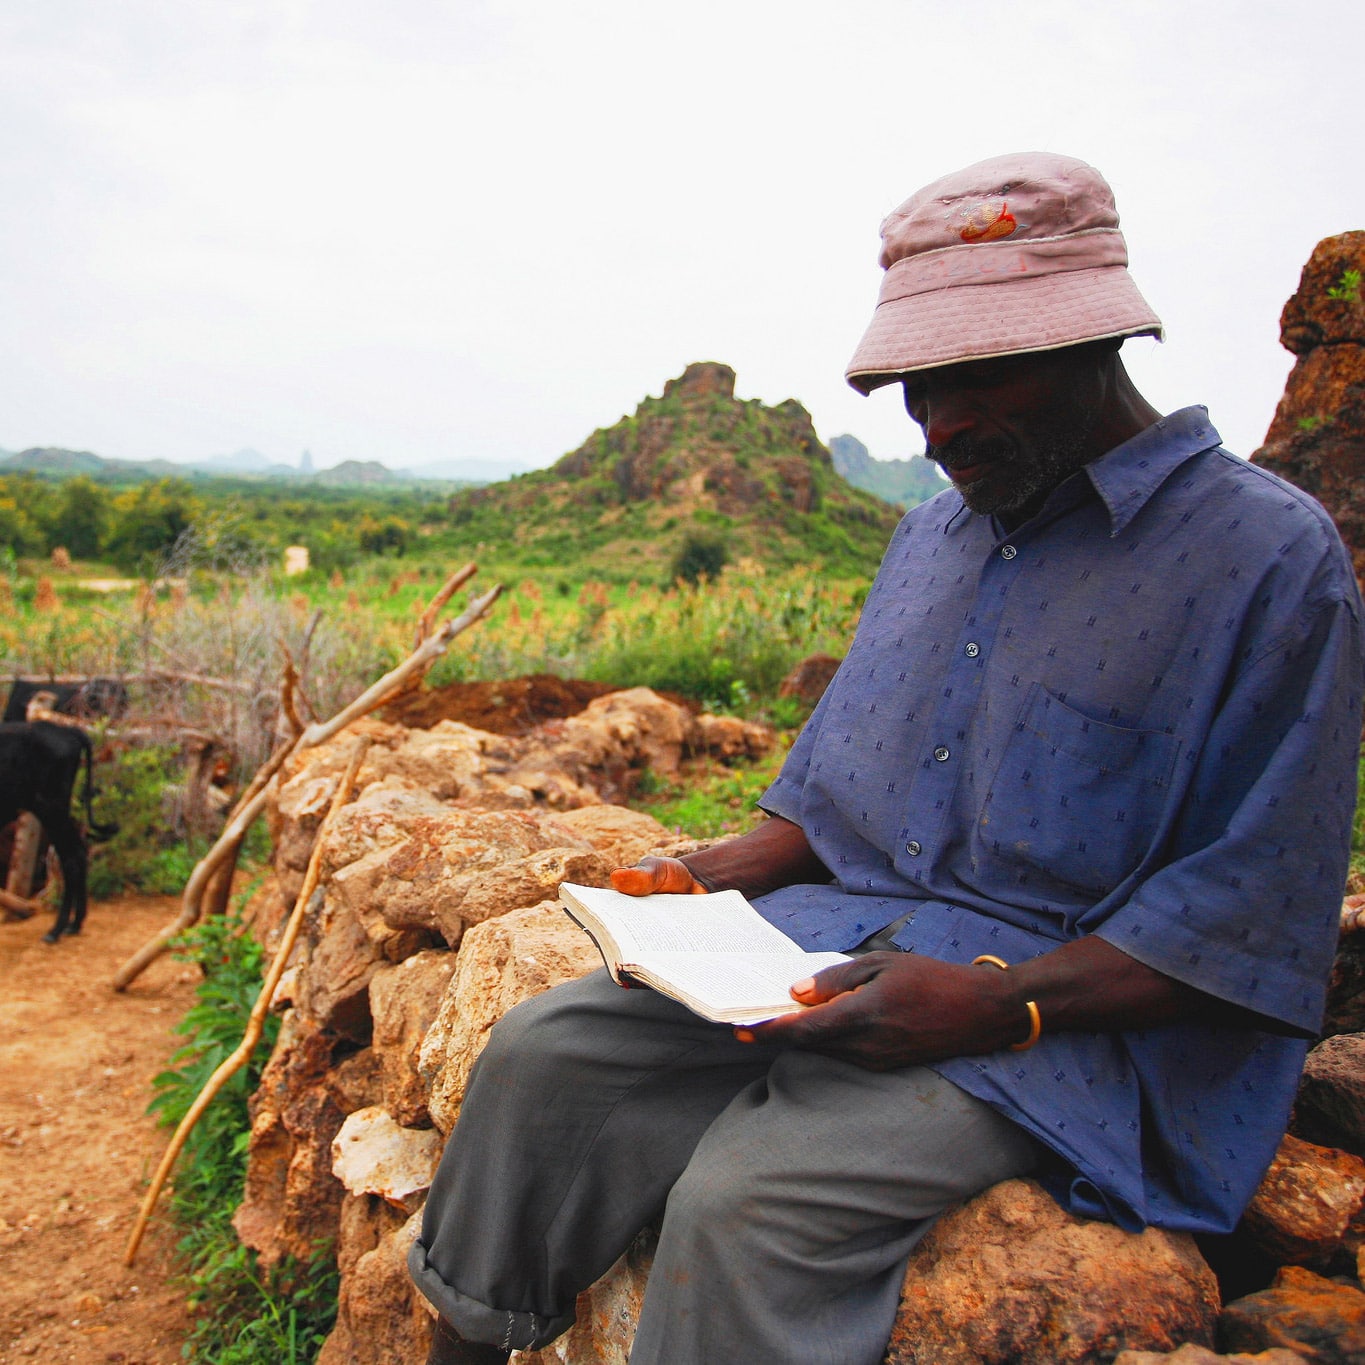 A shepherd in Cameroon reads his Bible